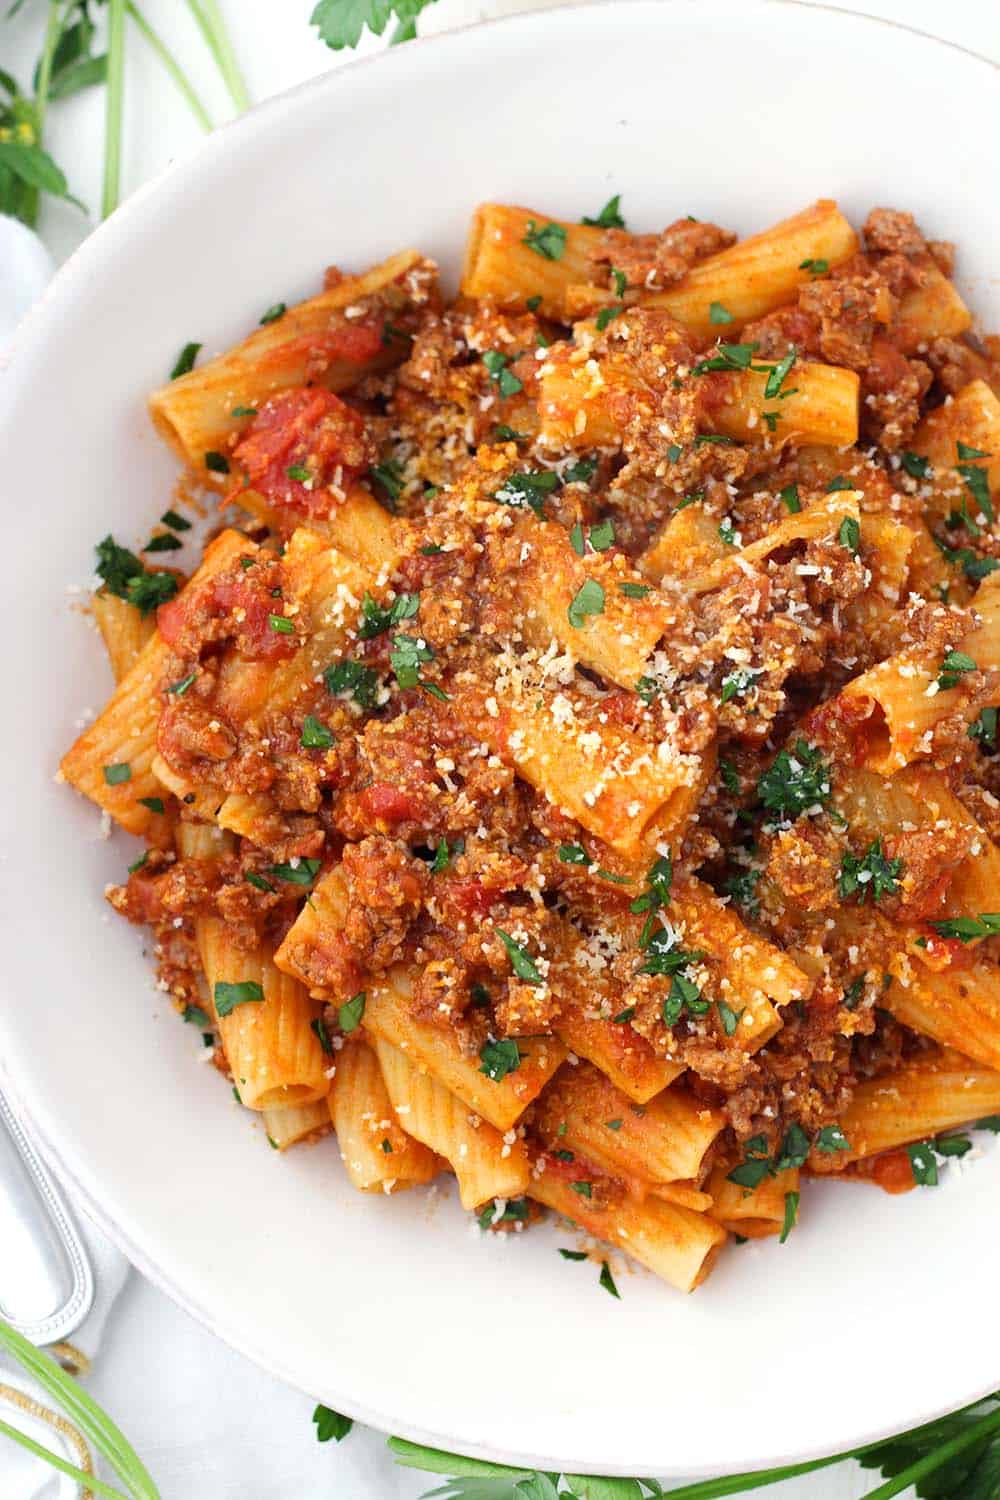 With a few tricks and only five ingredients, you can make the BEST Pasta with Bolognese sauce at home- the kind where the sauce clings to every piece of pasta and has the most authentic Italian taste!